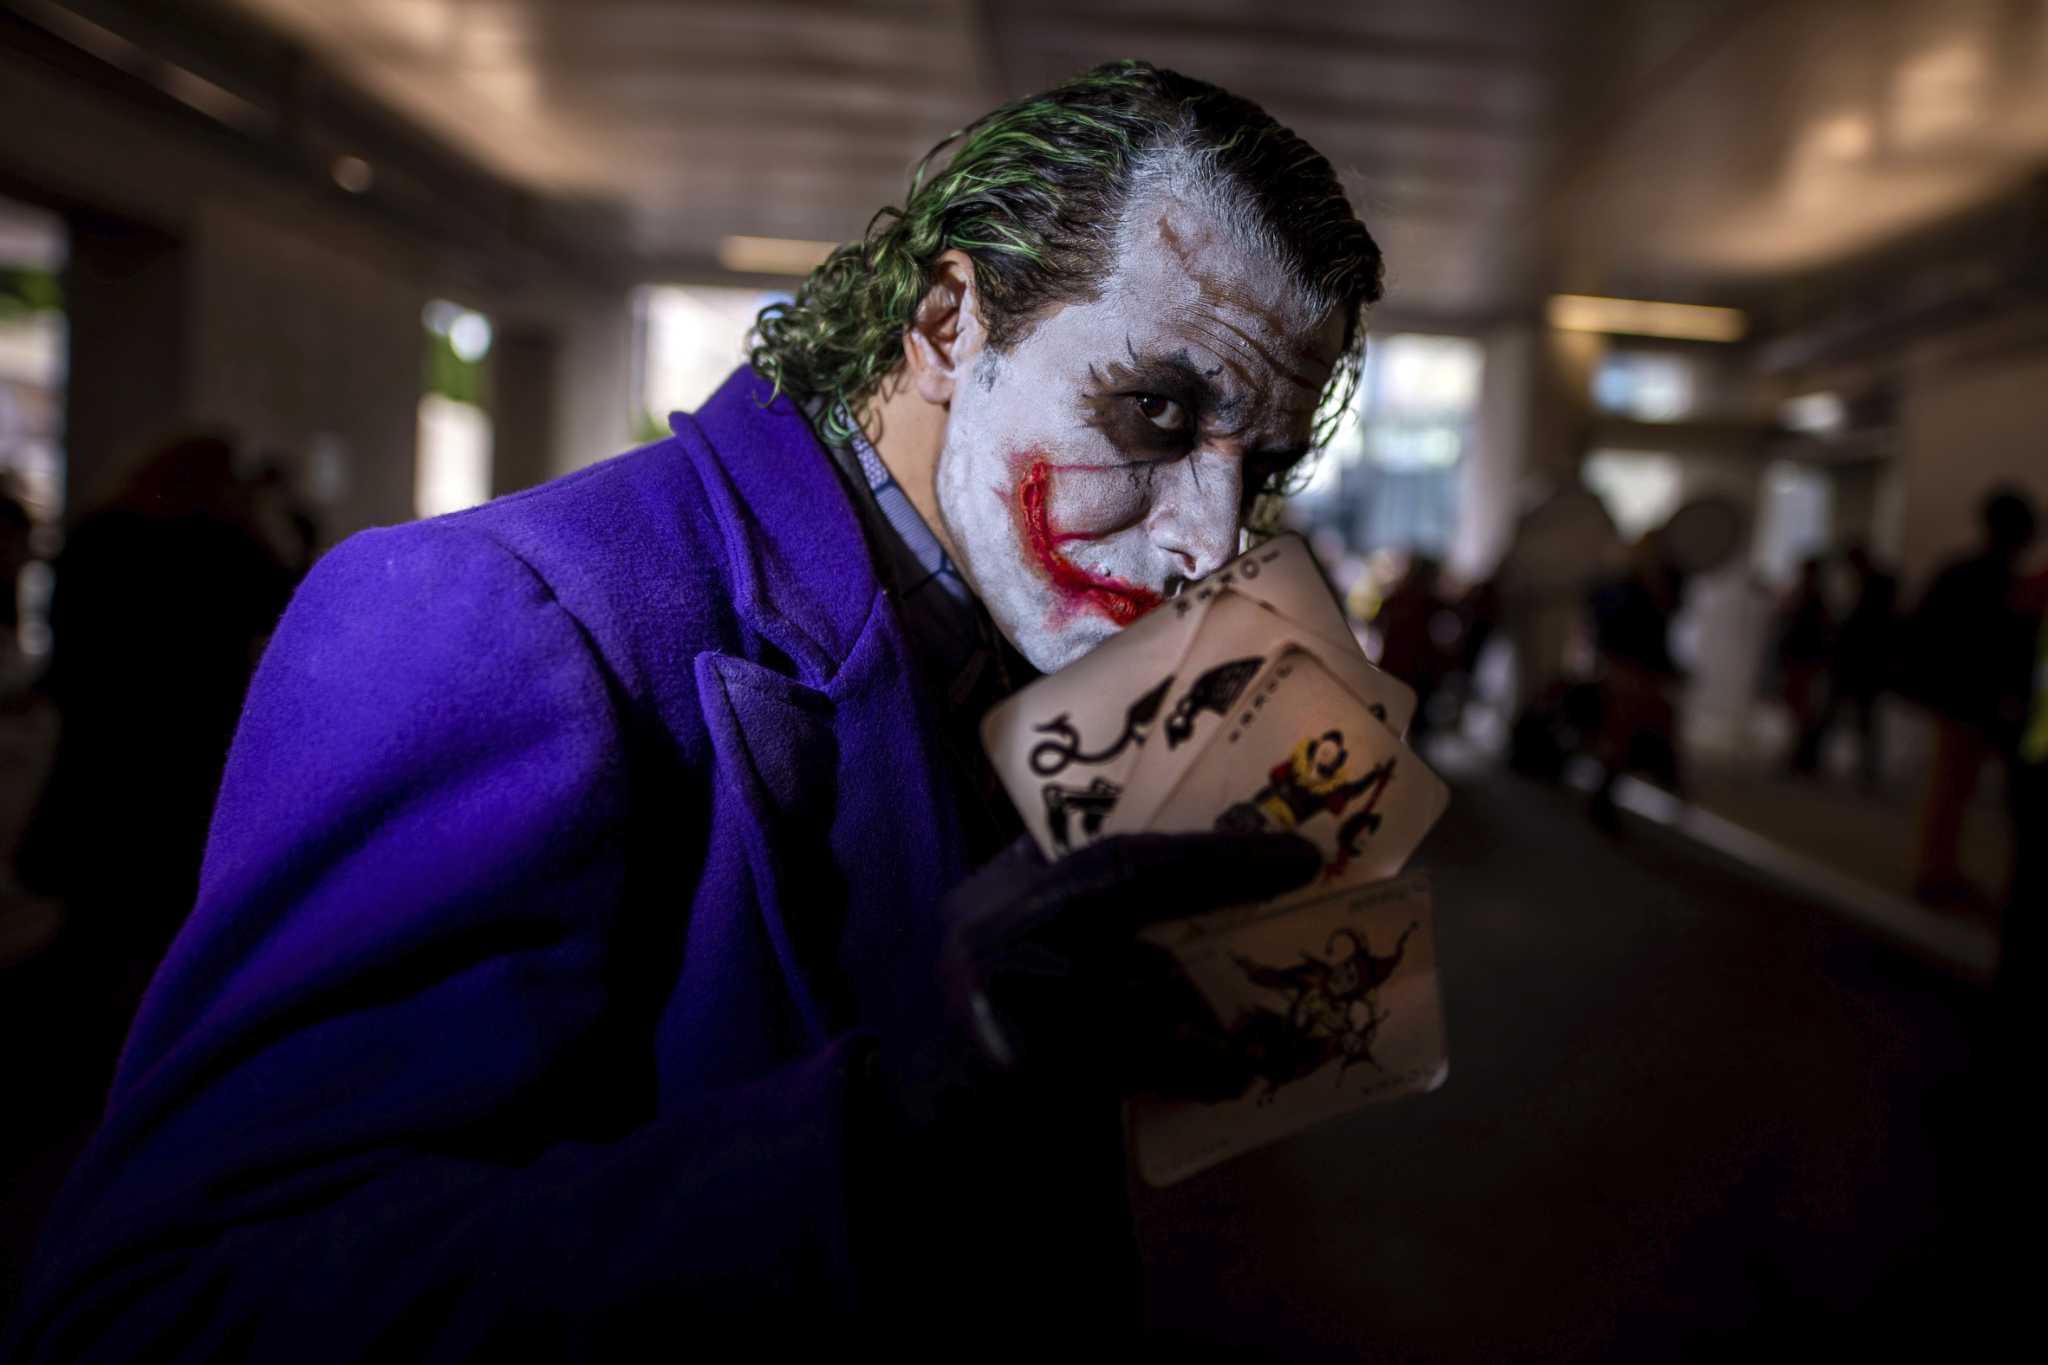 Joker' movie leads The theaters with controversy and with extra ...